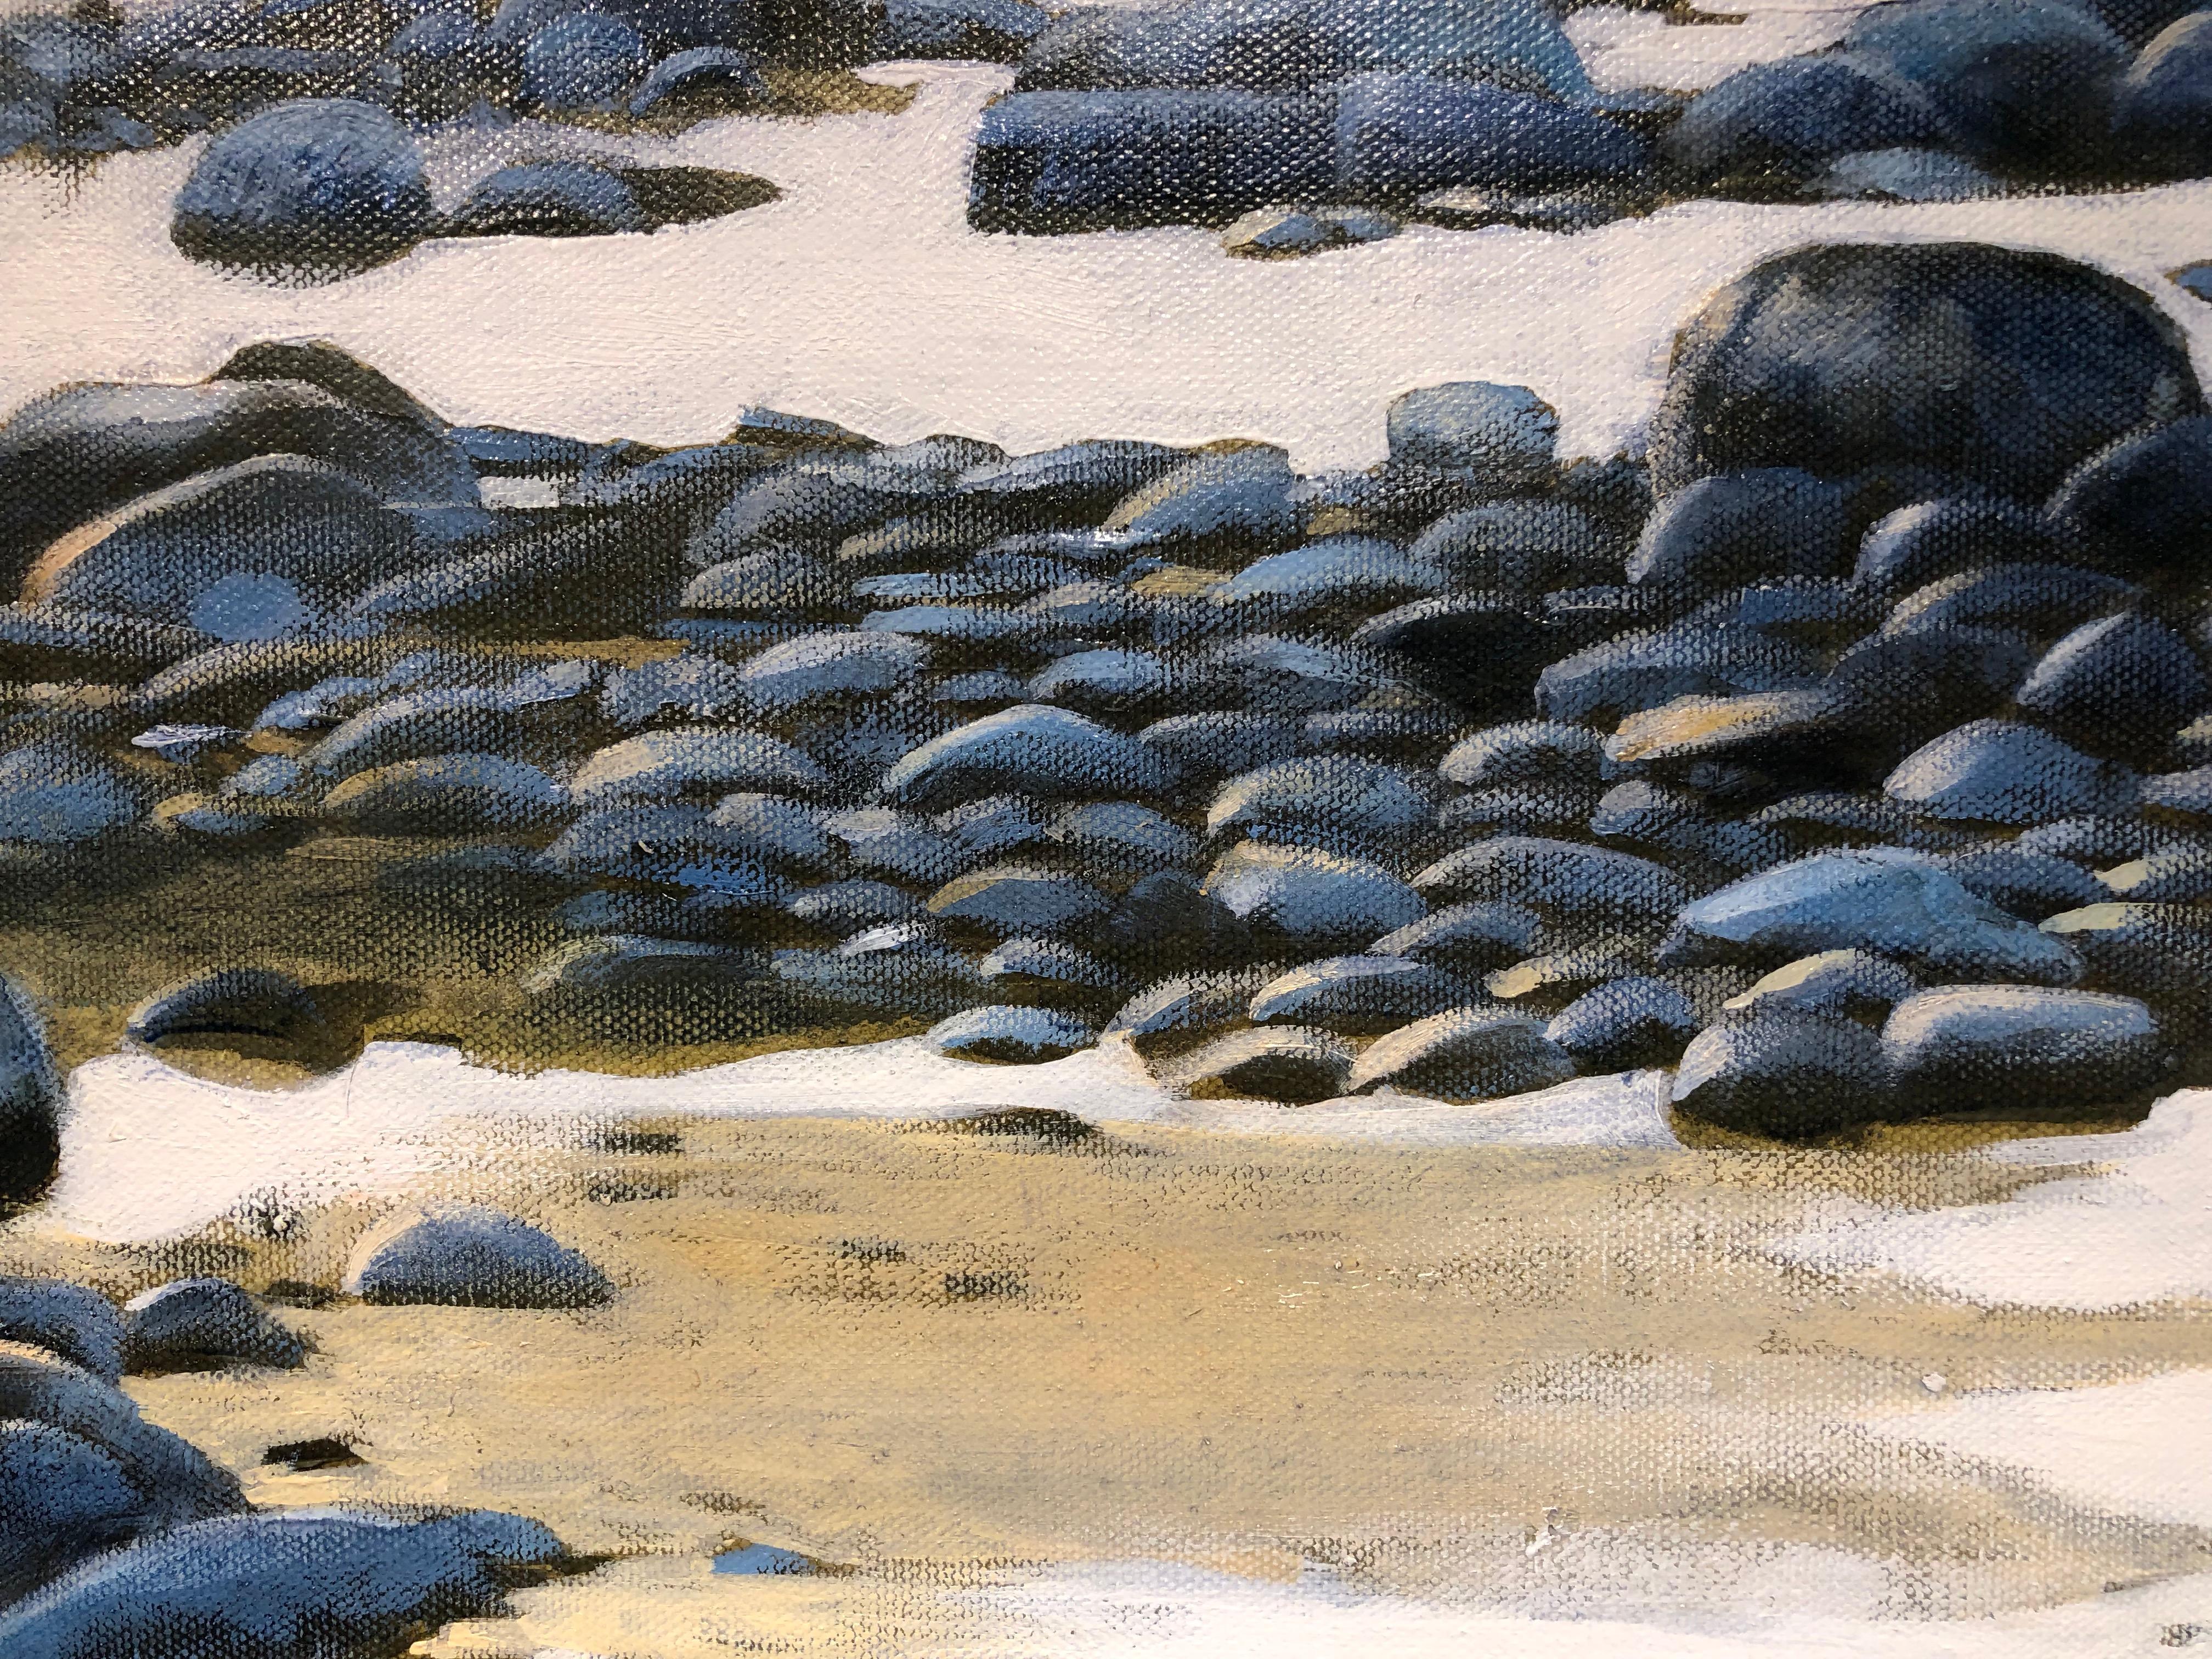 Going Blue - Original Oil on Canvas Painting with Water and Stones at the Shore 1